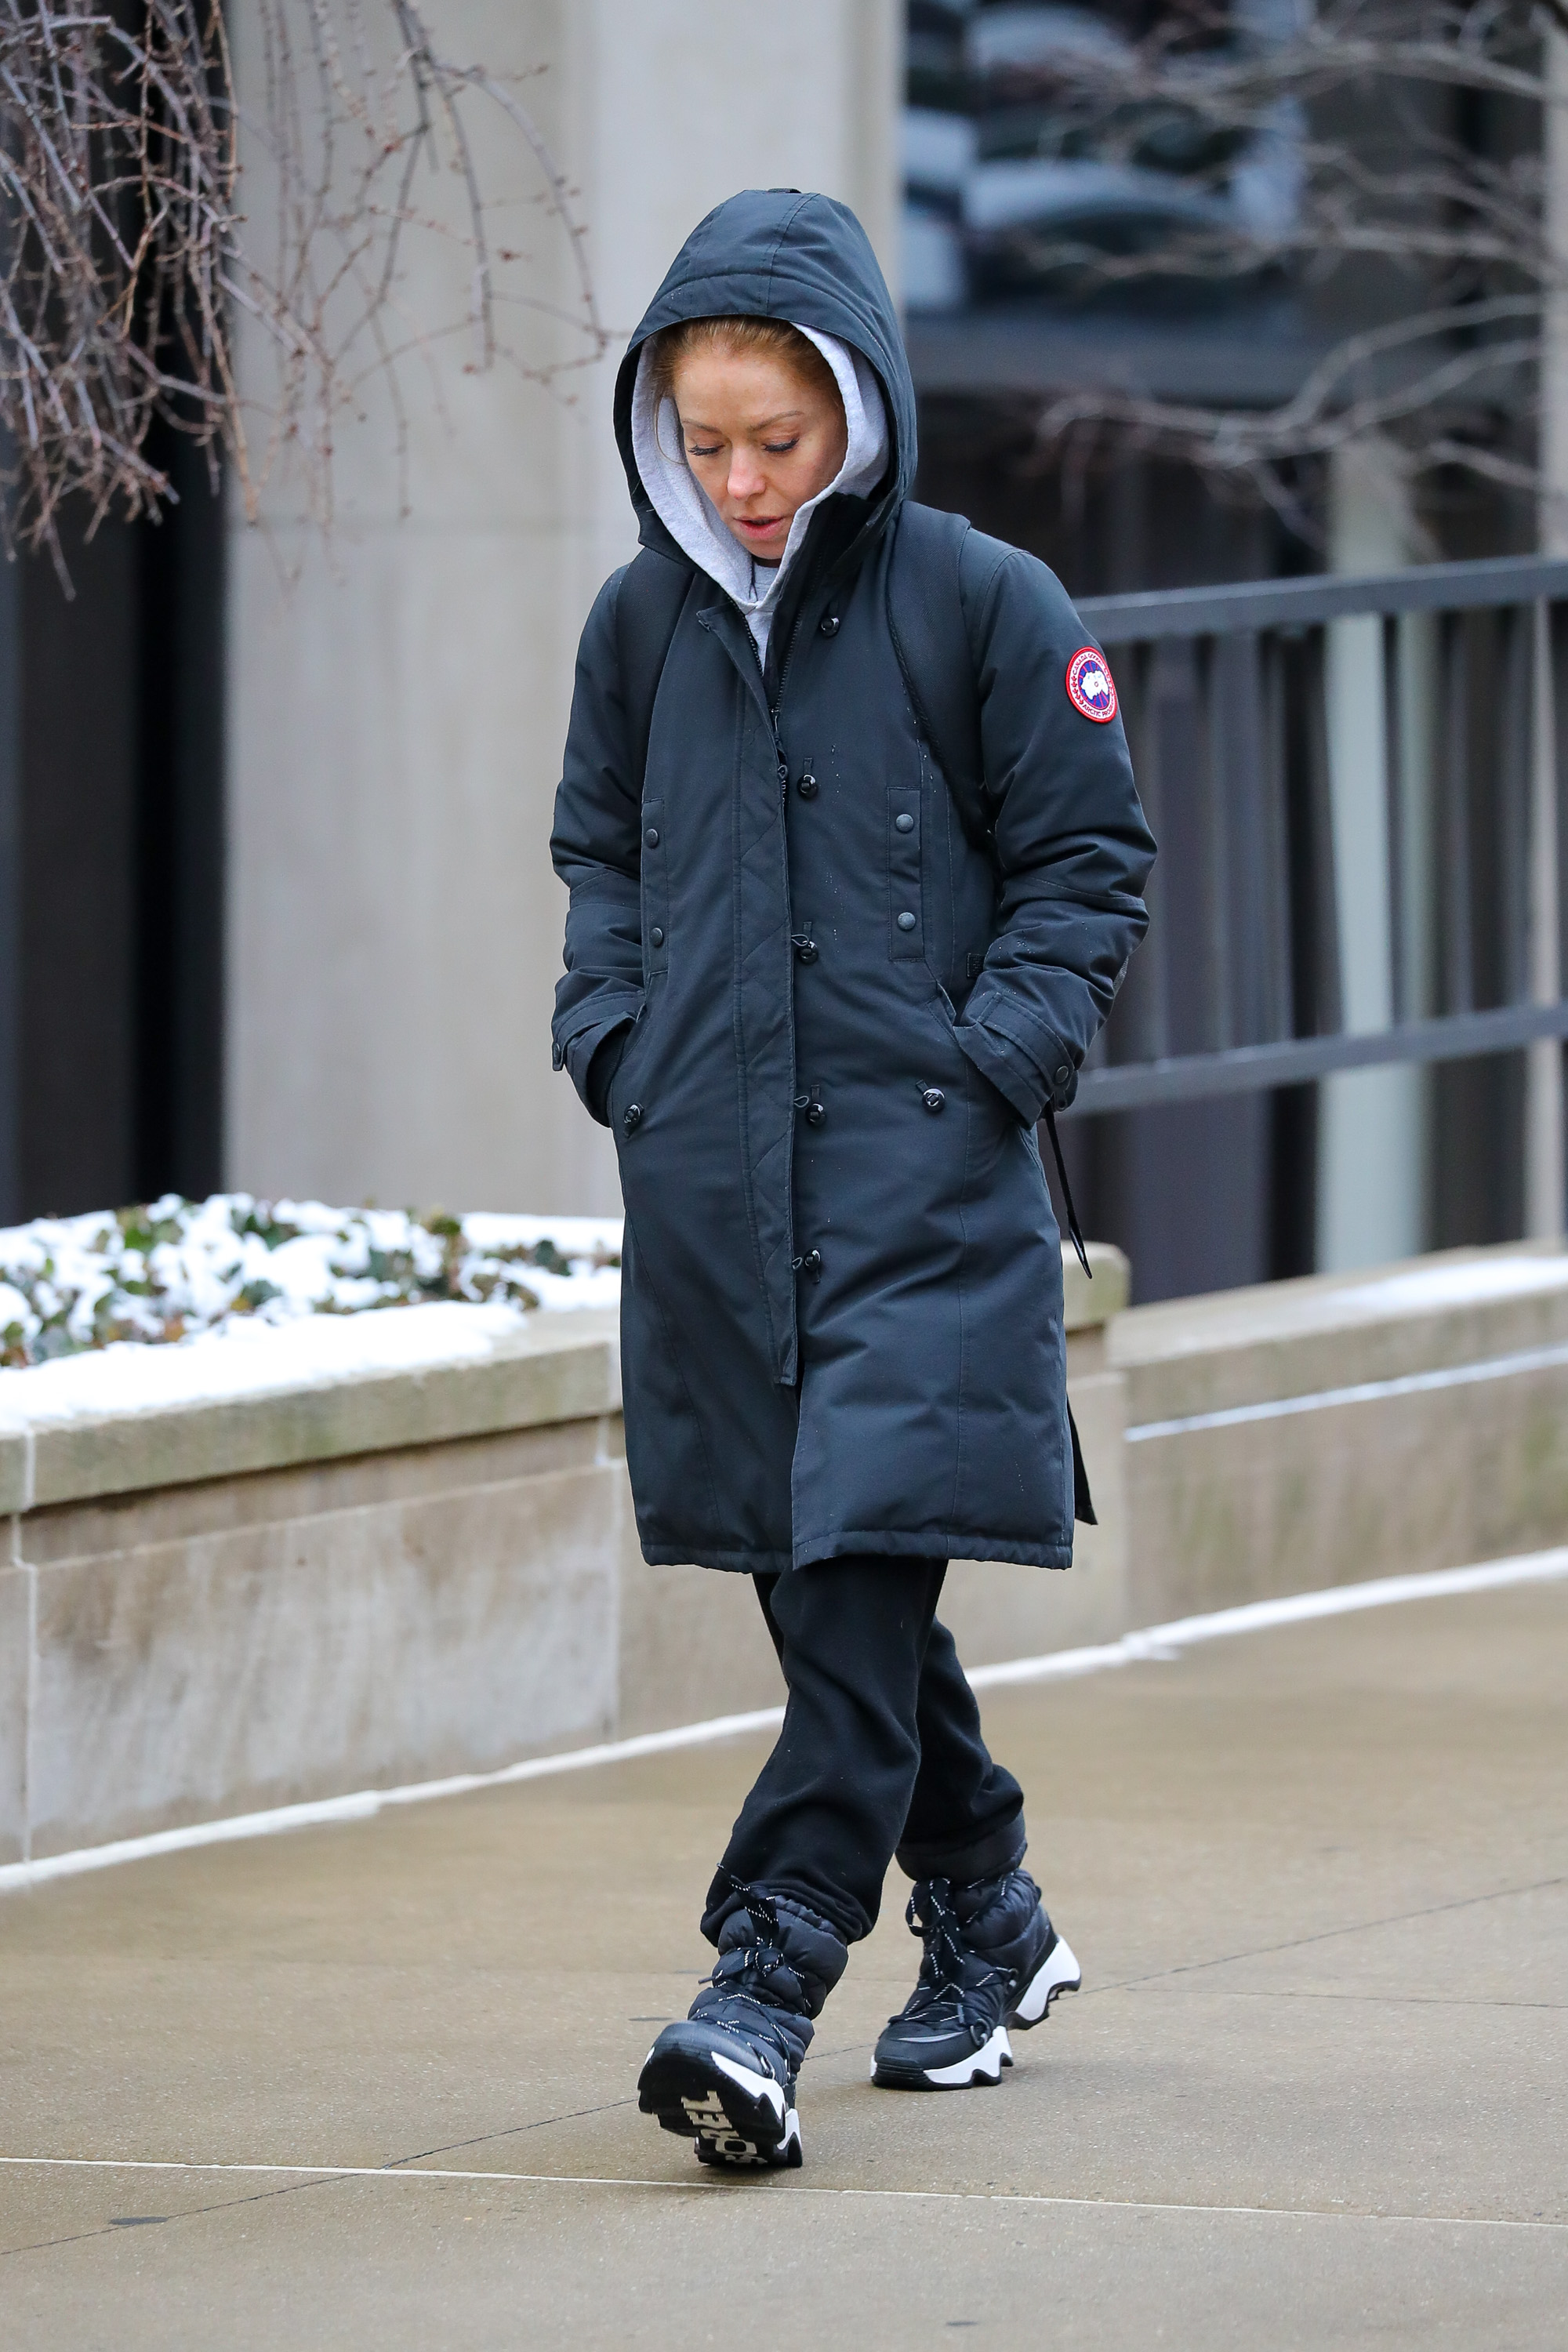 She sported an extremely expensive coat while braving the snow